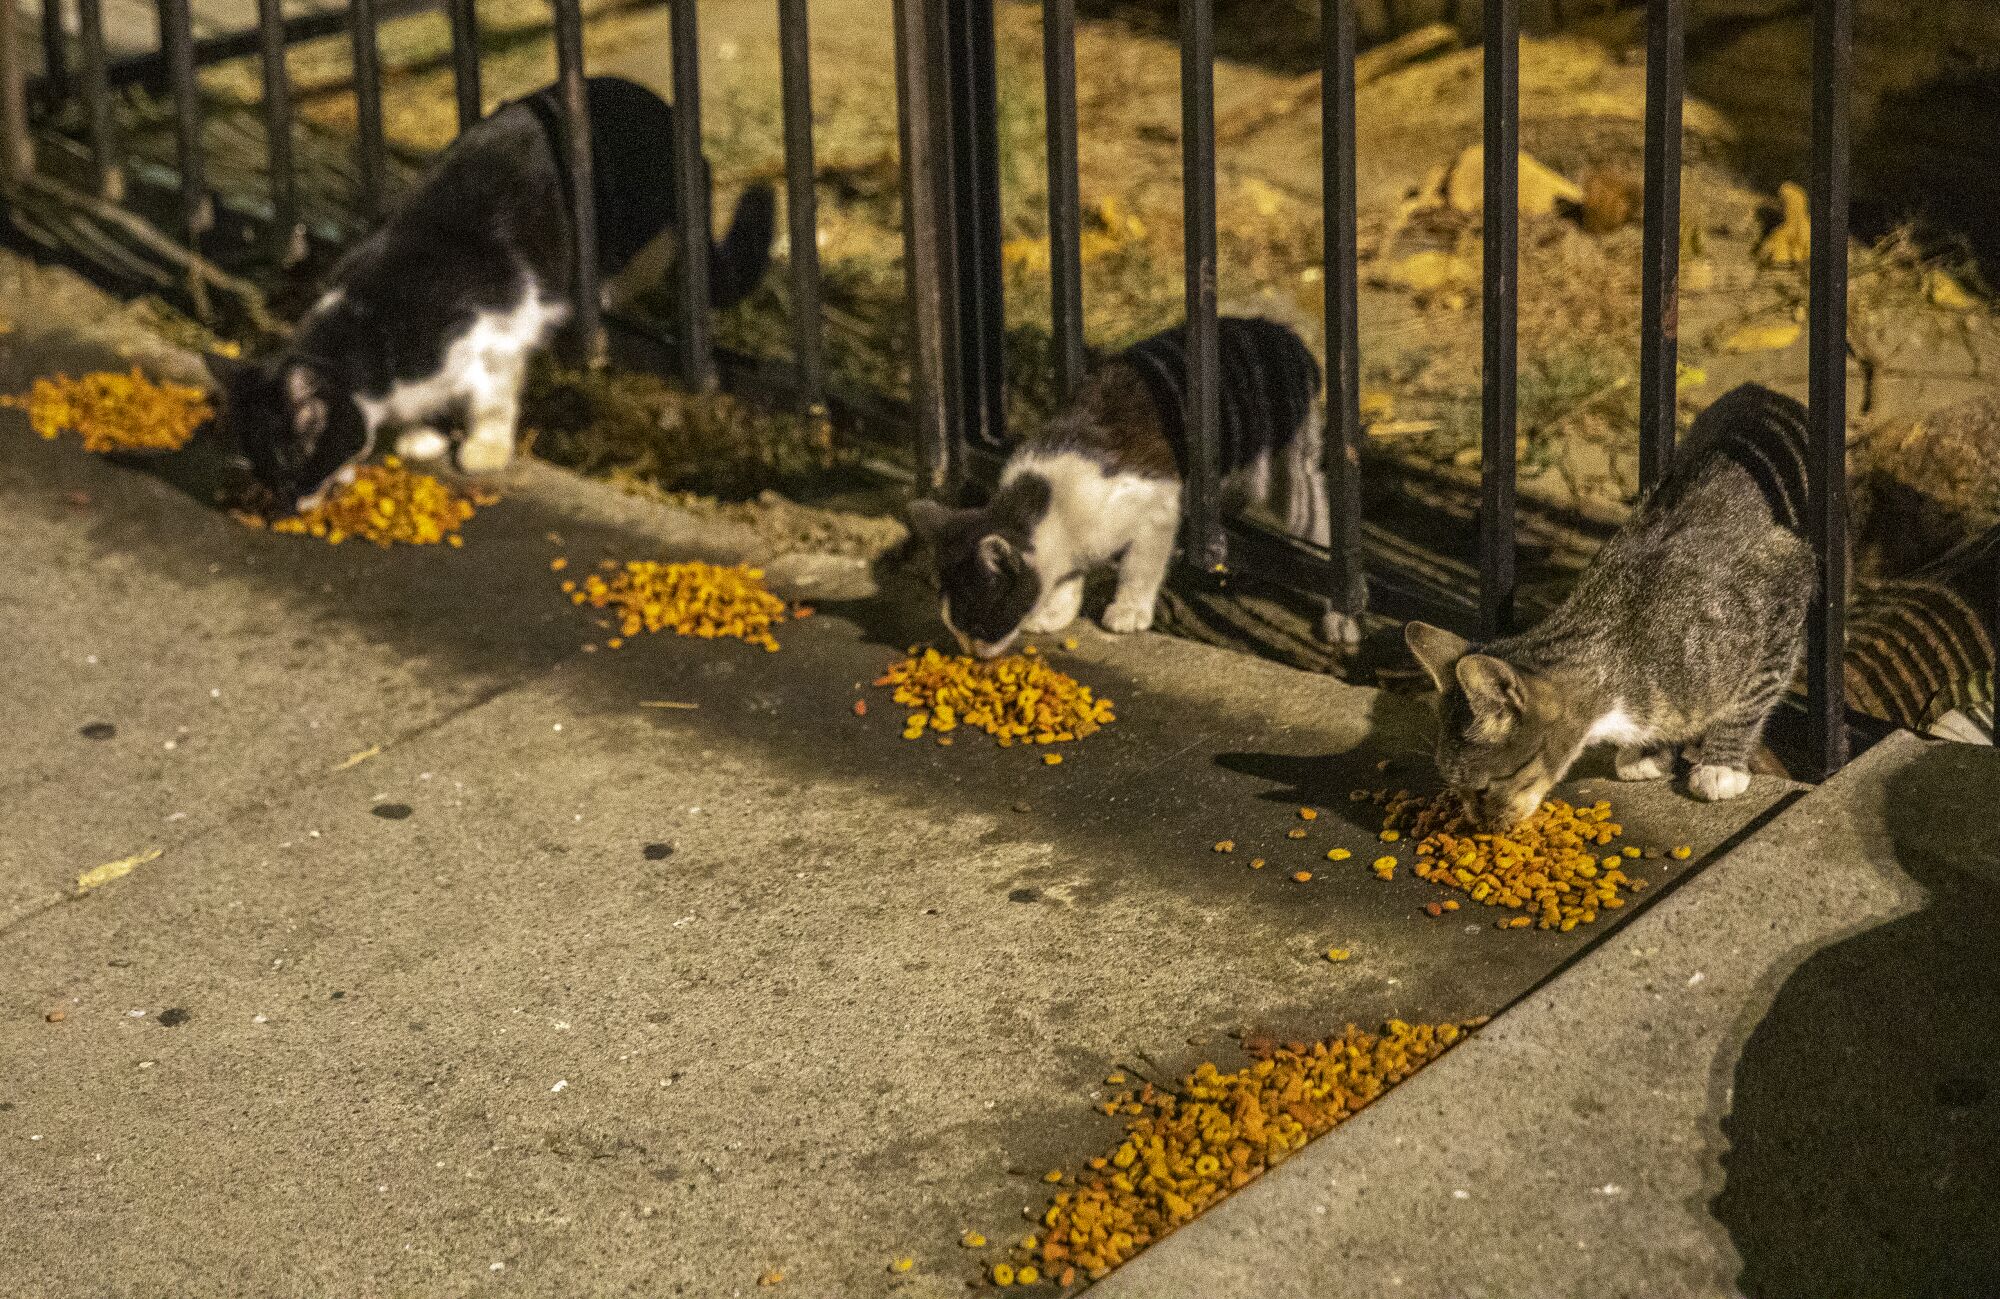 Stray cats eat dry cat food placed there by Augustine Hurtado in South Los Angeles.